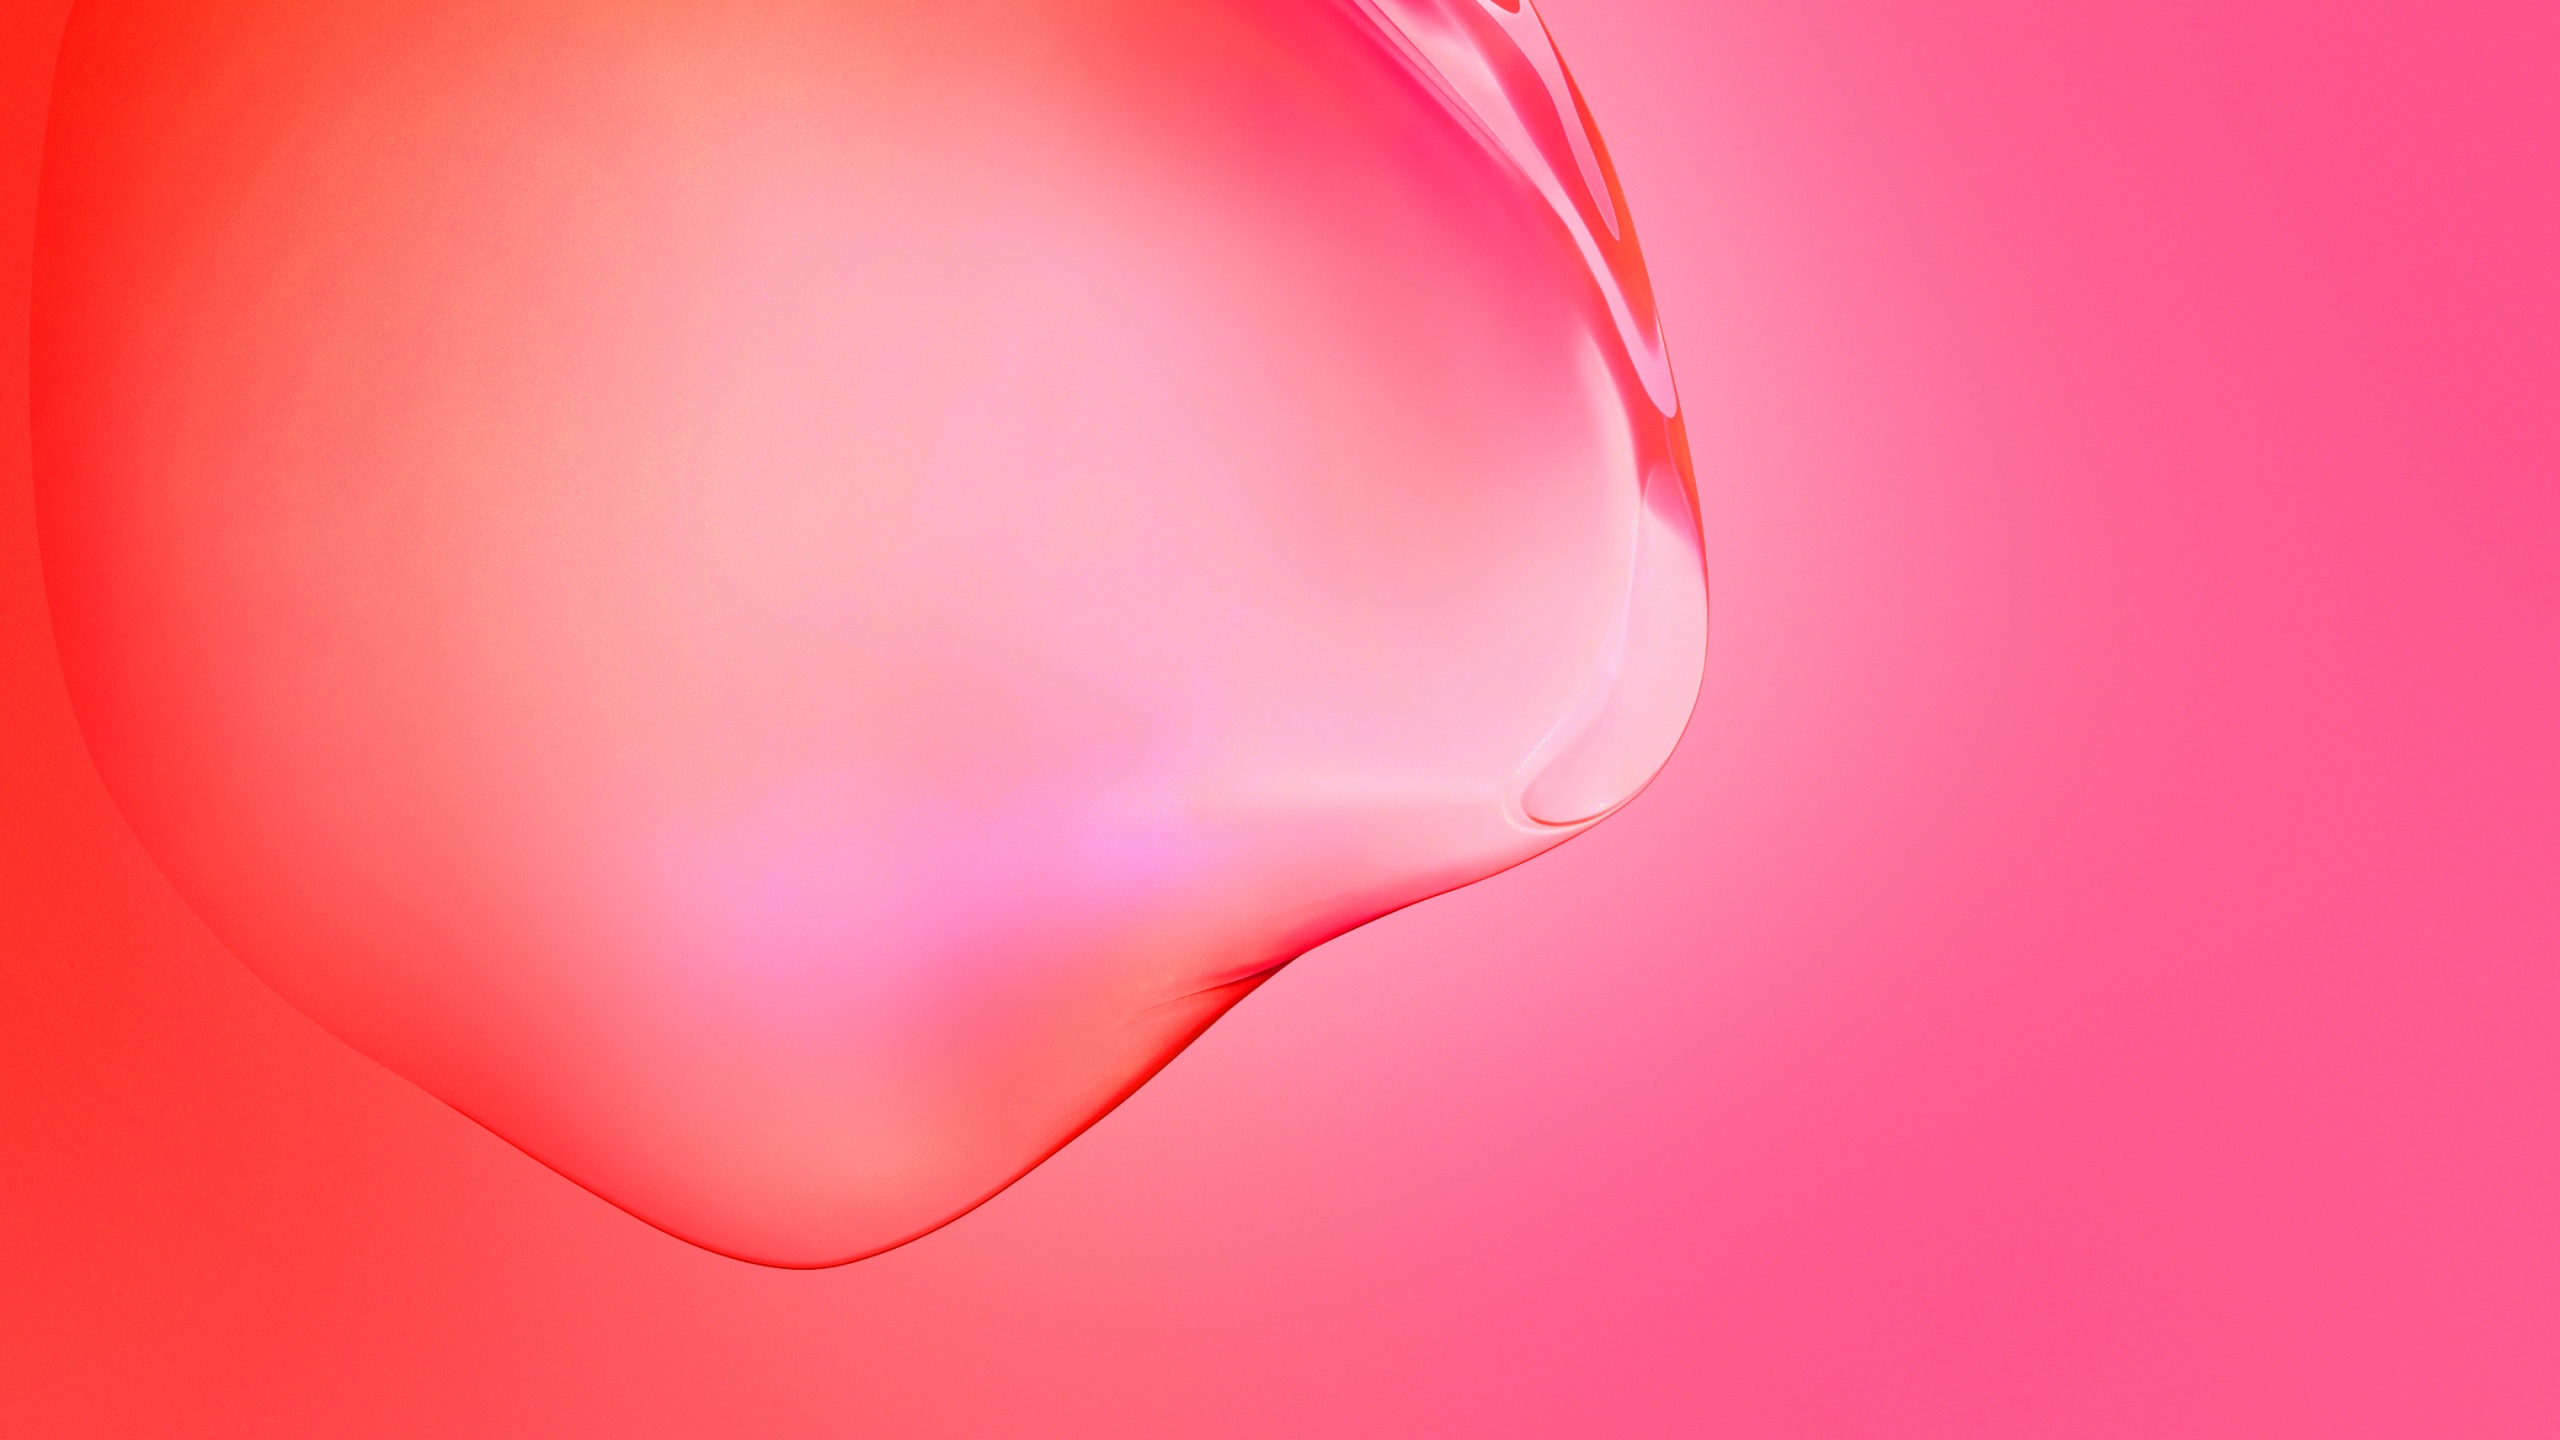 Samsung Galaxy S11 Wallpaper 4K, Red, Bubble, Gradients, Abstract, #1711